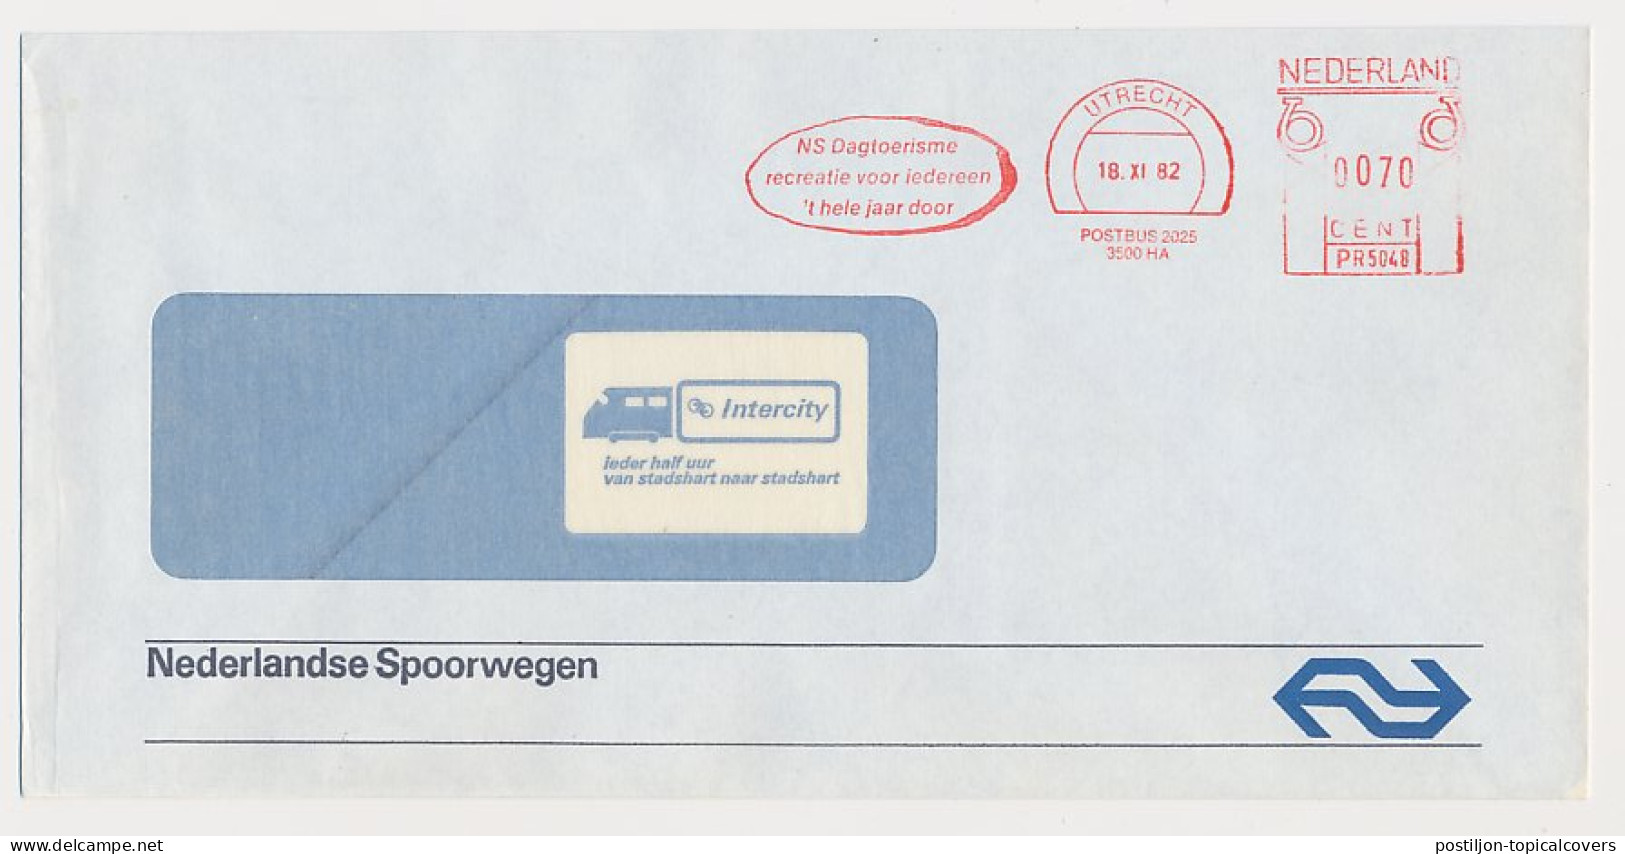 Illustrated Meter Cover Netherlands 1982 - Postalia 5048 NS - Dutch Railways - Day Tourism - Recreation For Everyone - Treni